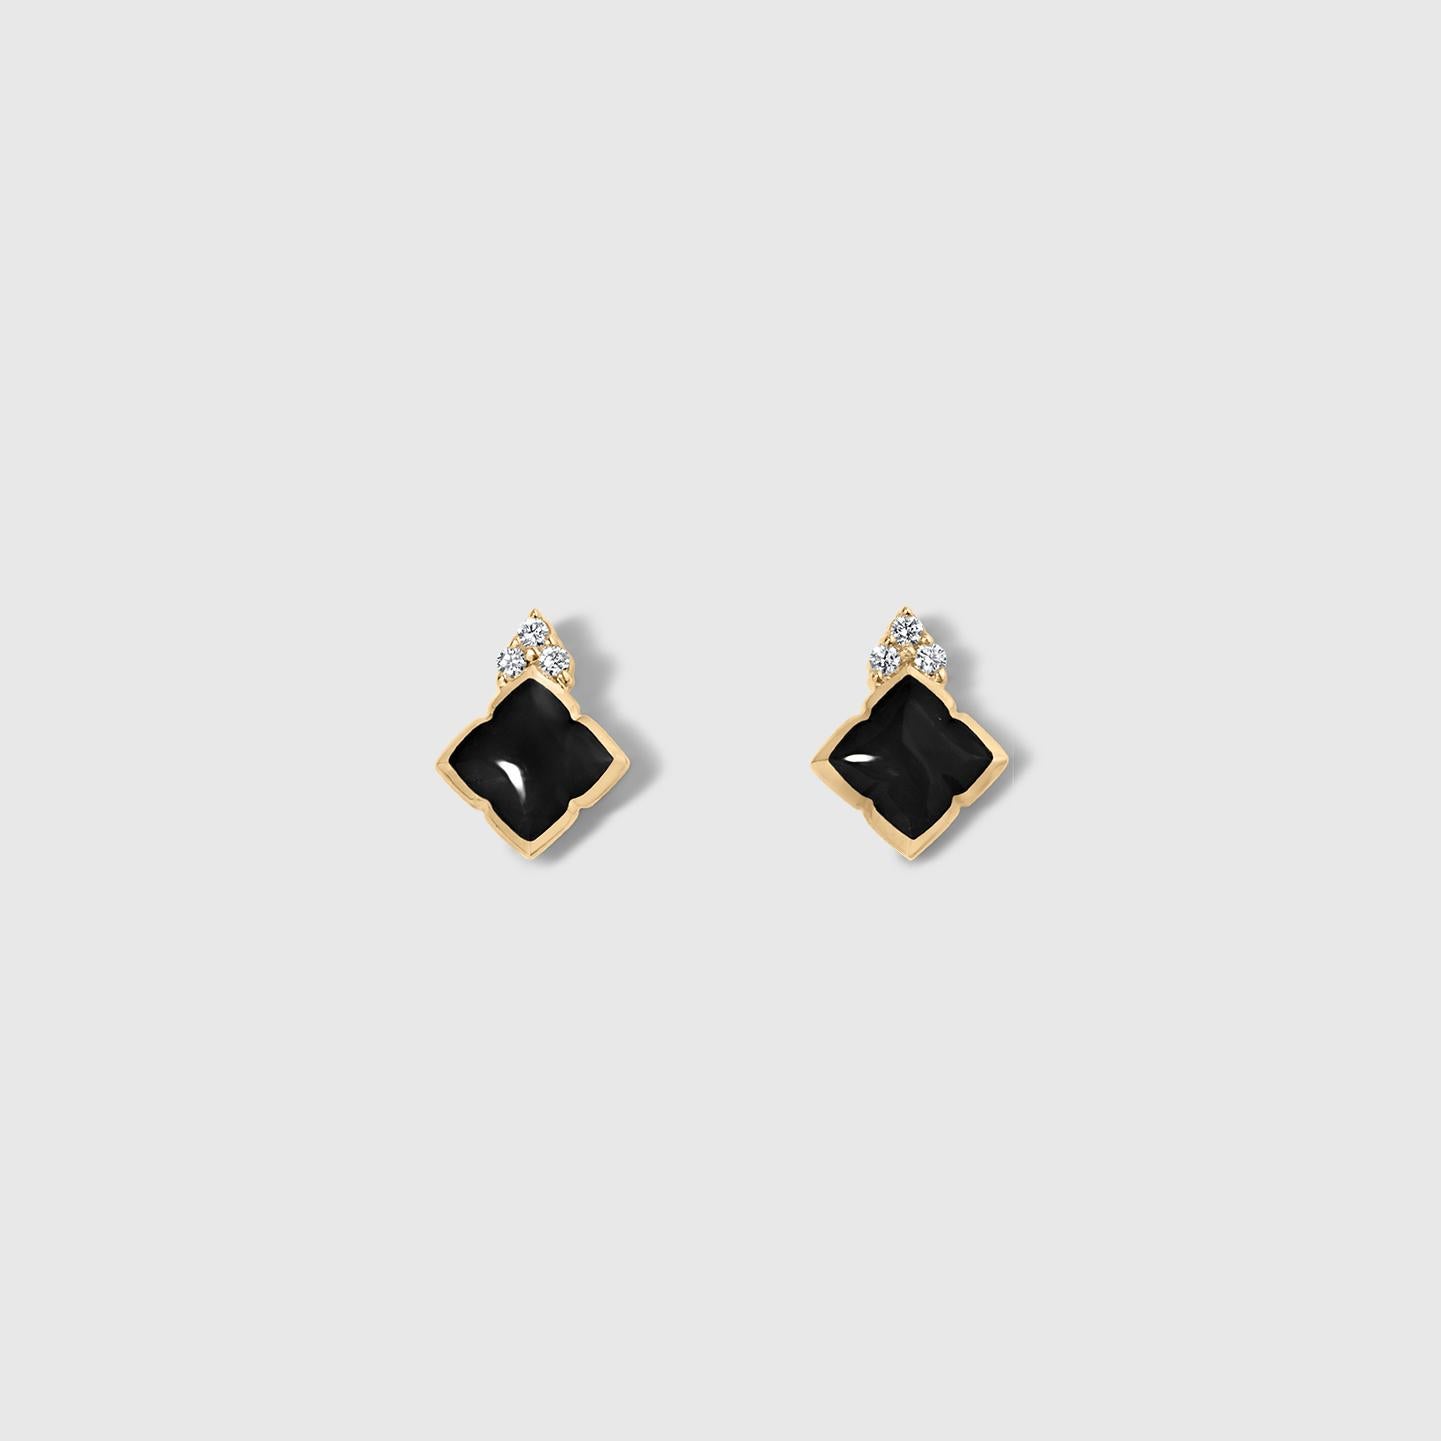 Contemporary Black Onyx Post Earrings with Diamond Detail, 14 Karat Yellow Gold, by Kabana For Sale